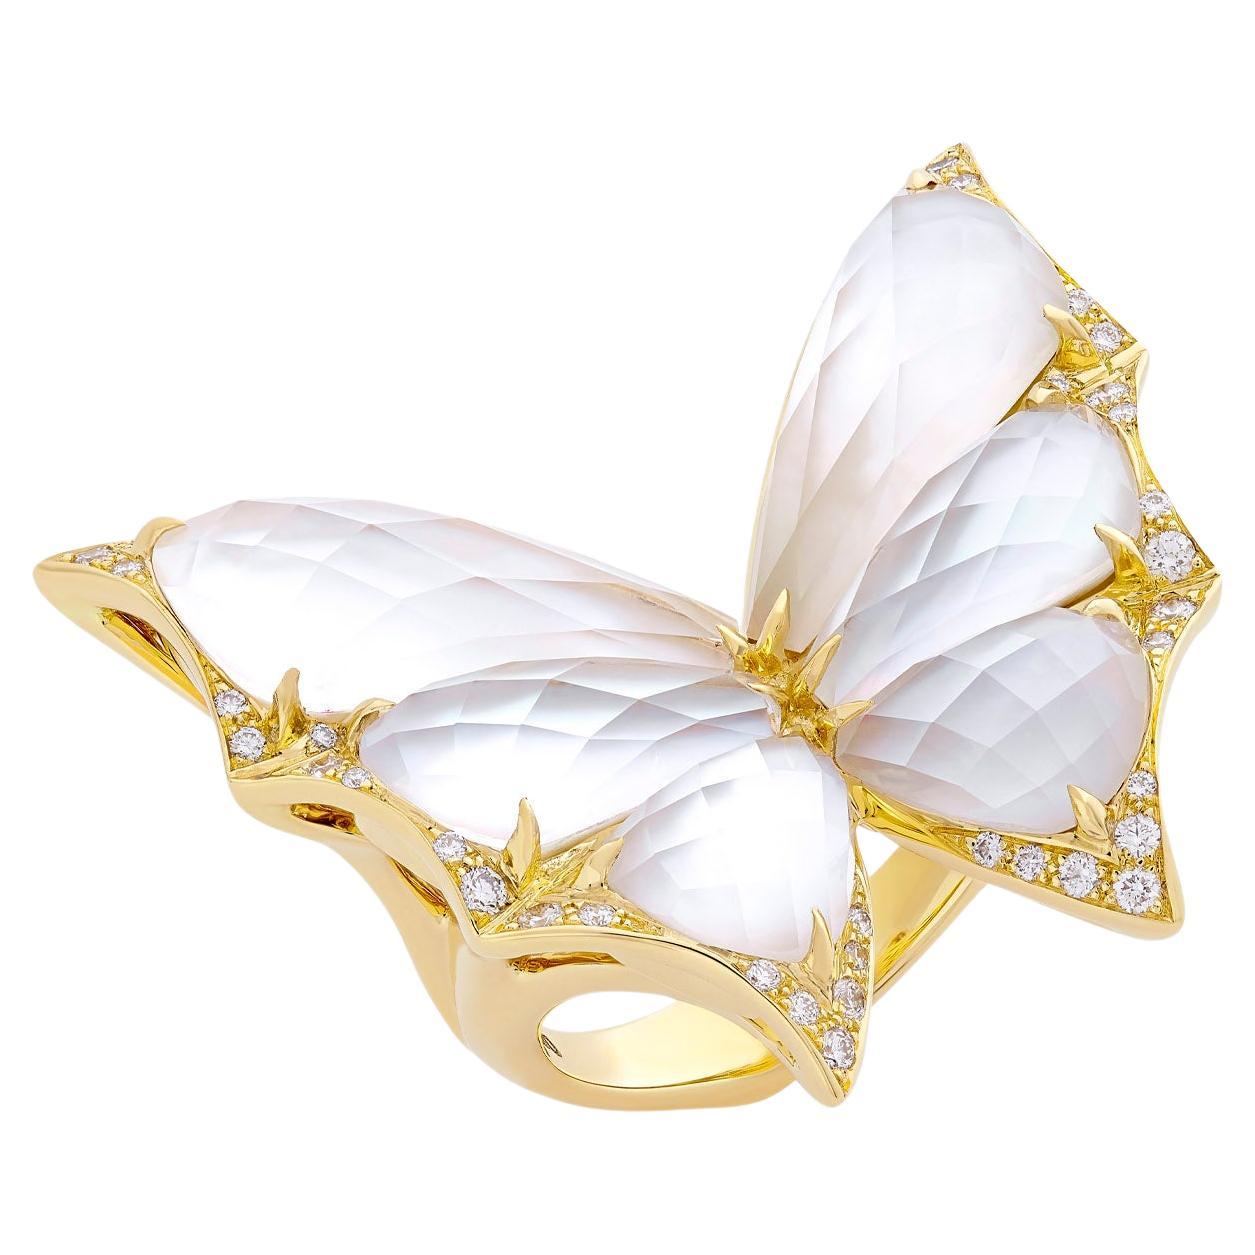 For Sale:  Crystal Haze Large Cocktail Ring - 18 Carat Yellow Gold and Mother of Pearl